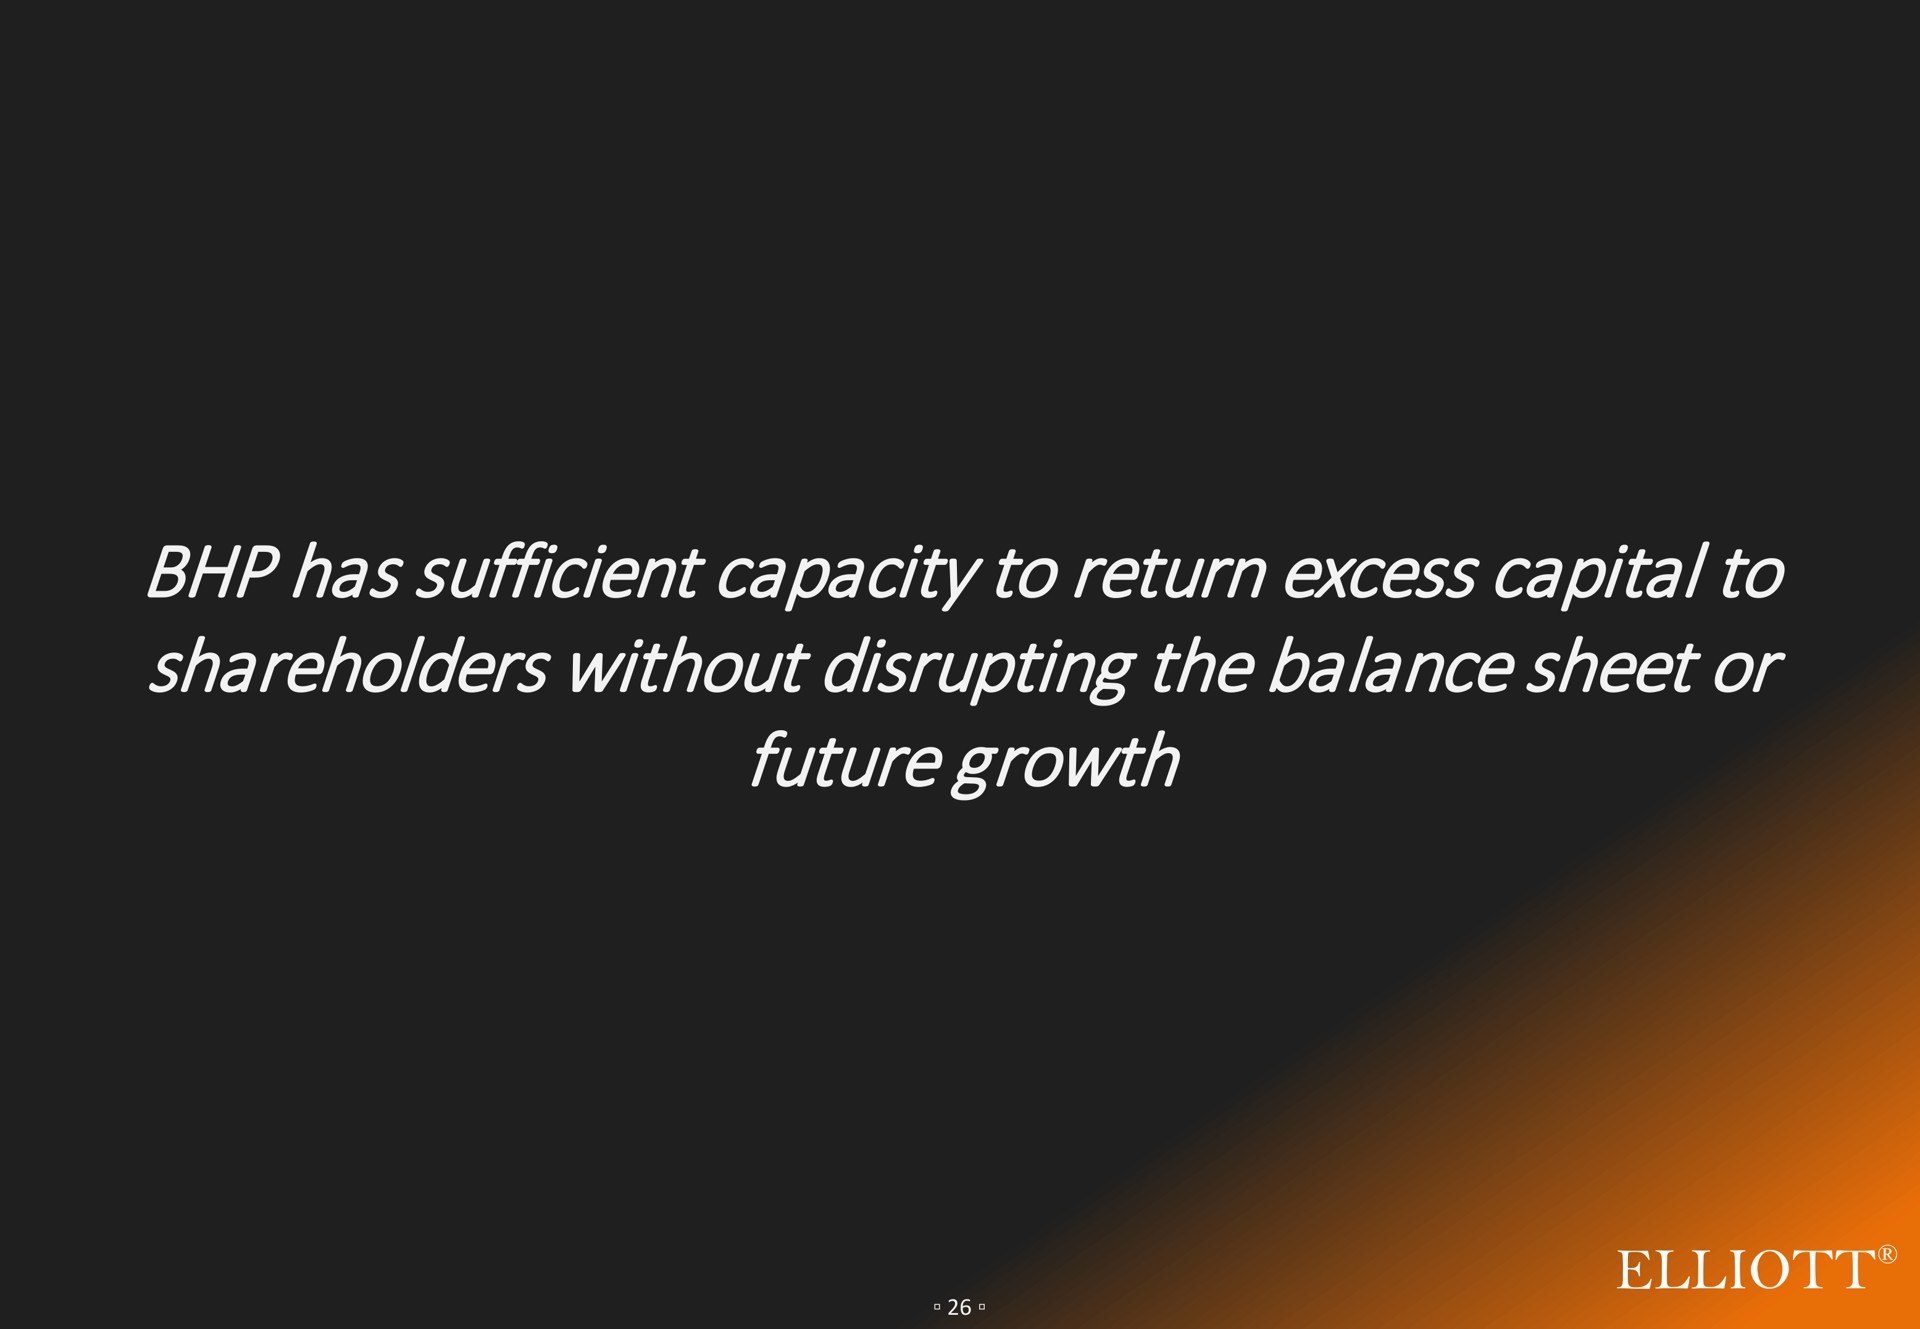 has sufficient capacity to return excess capital to shareholders without disrupting the balance sheet or future growth | Elliott Management